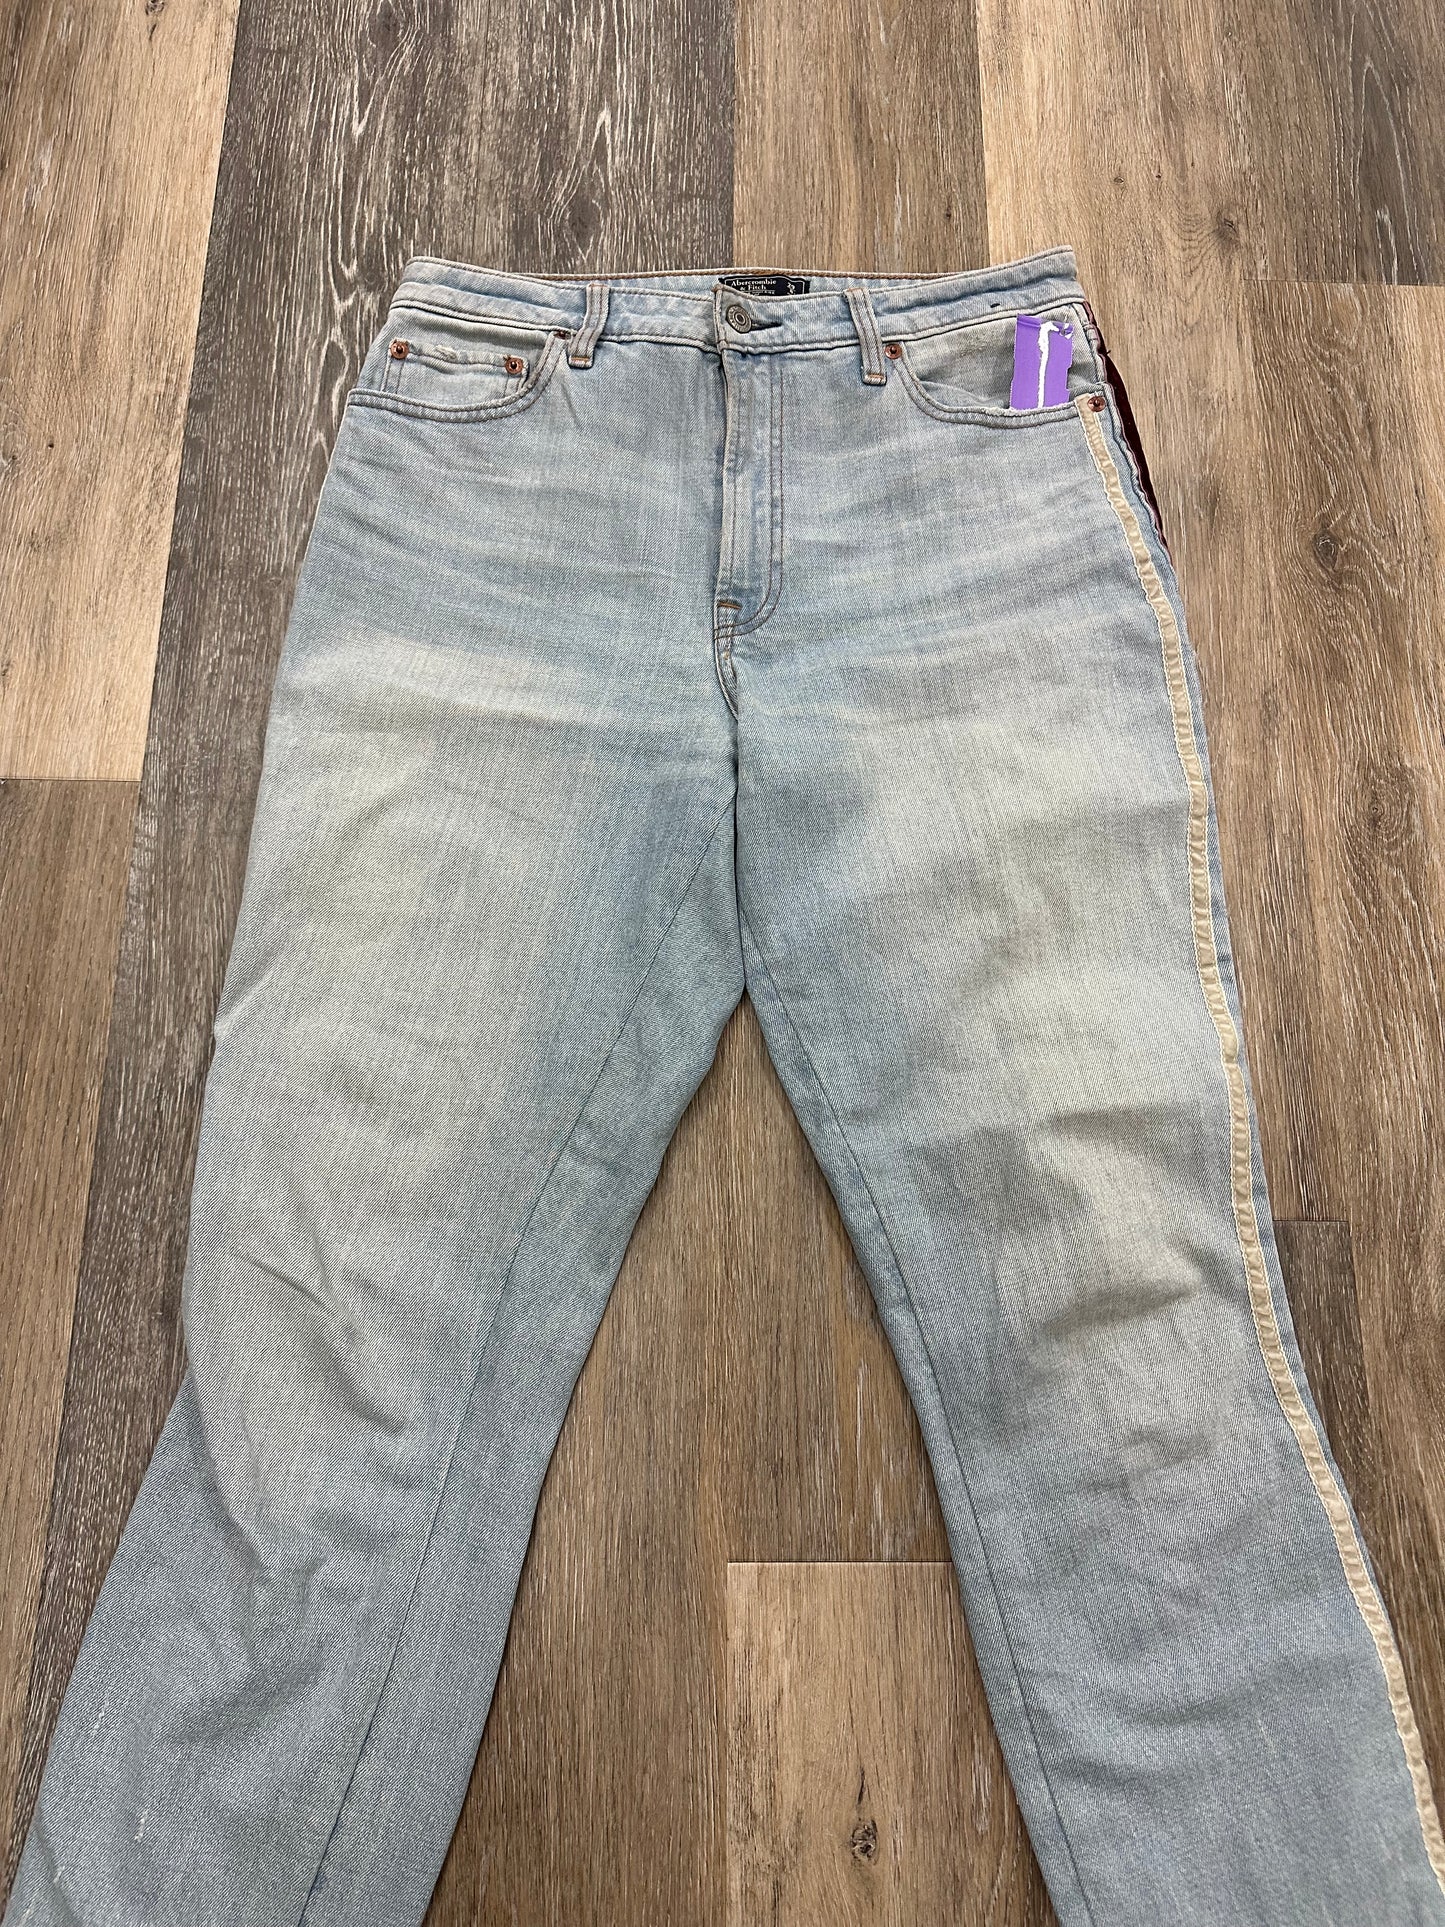 Jeans Relaxed/boyfriend By Abercrombie And Fitch  Size: 8